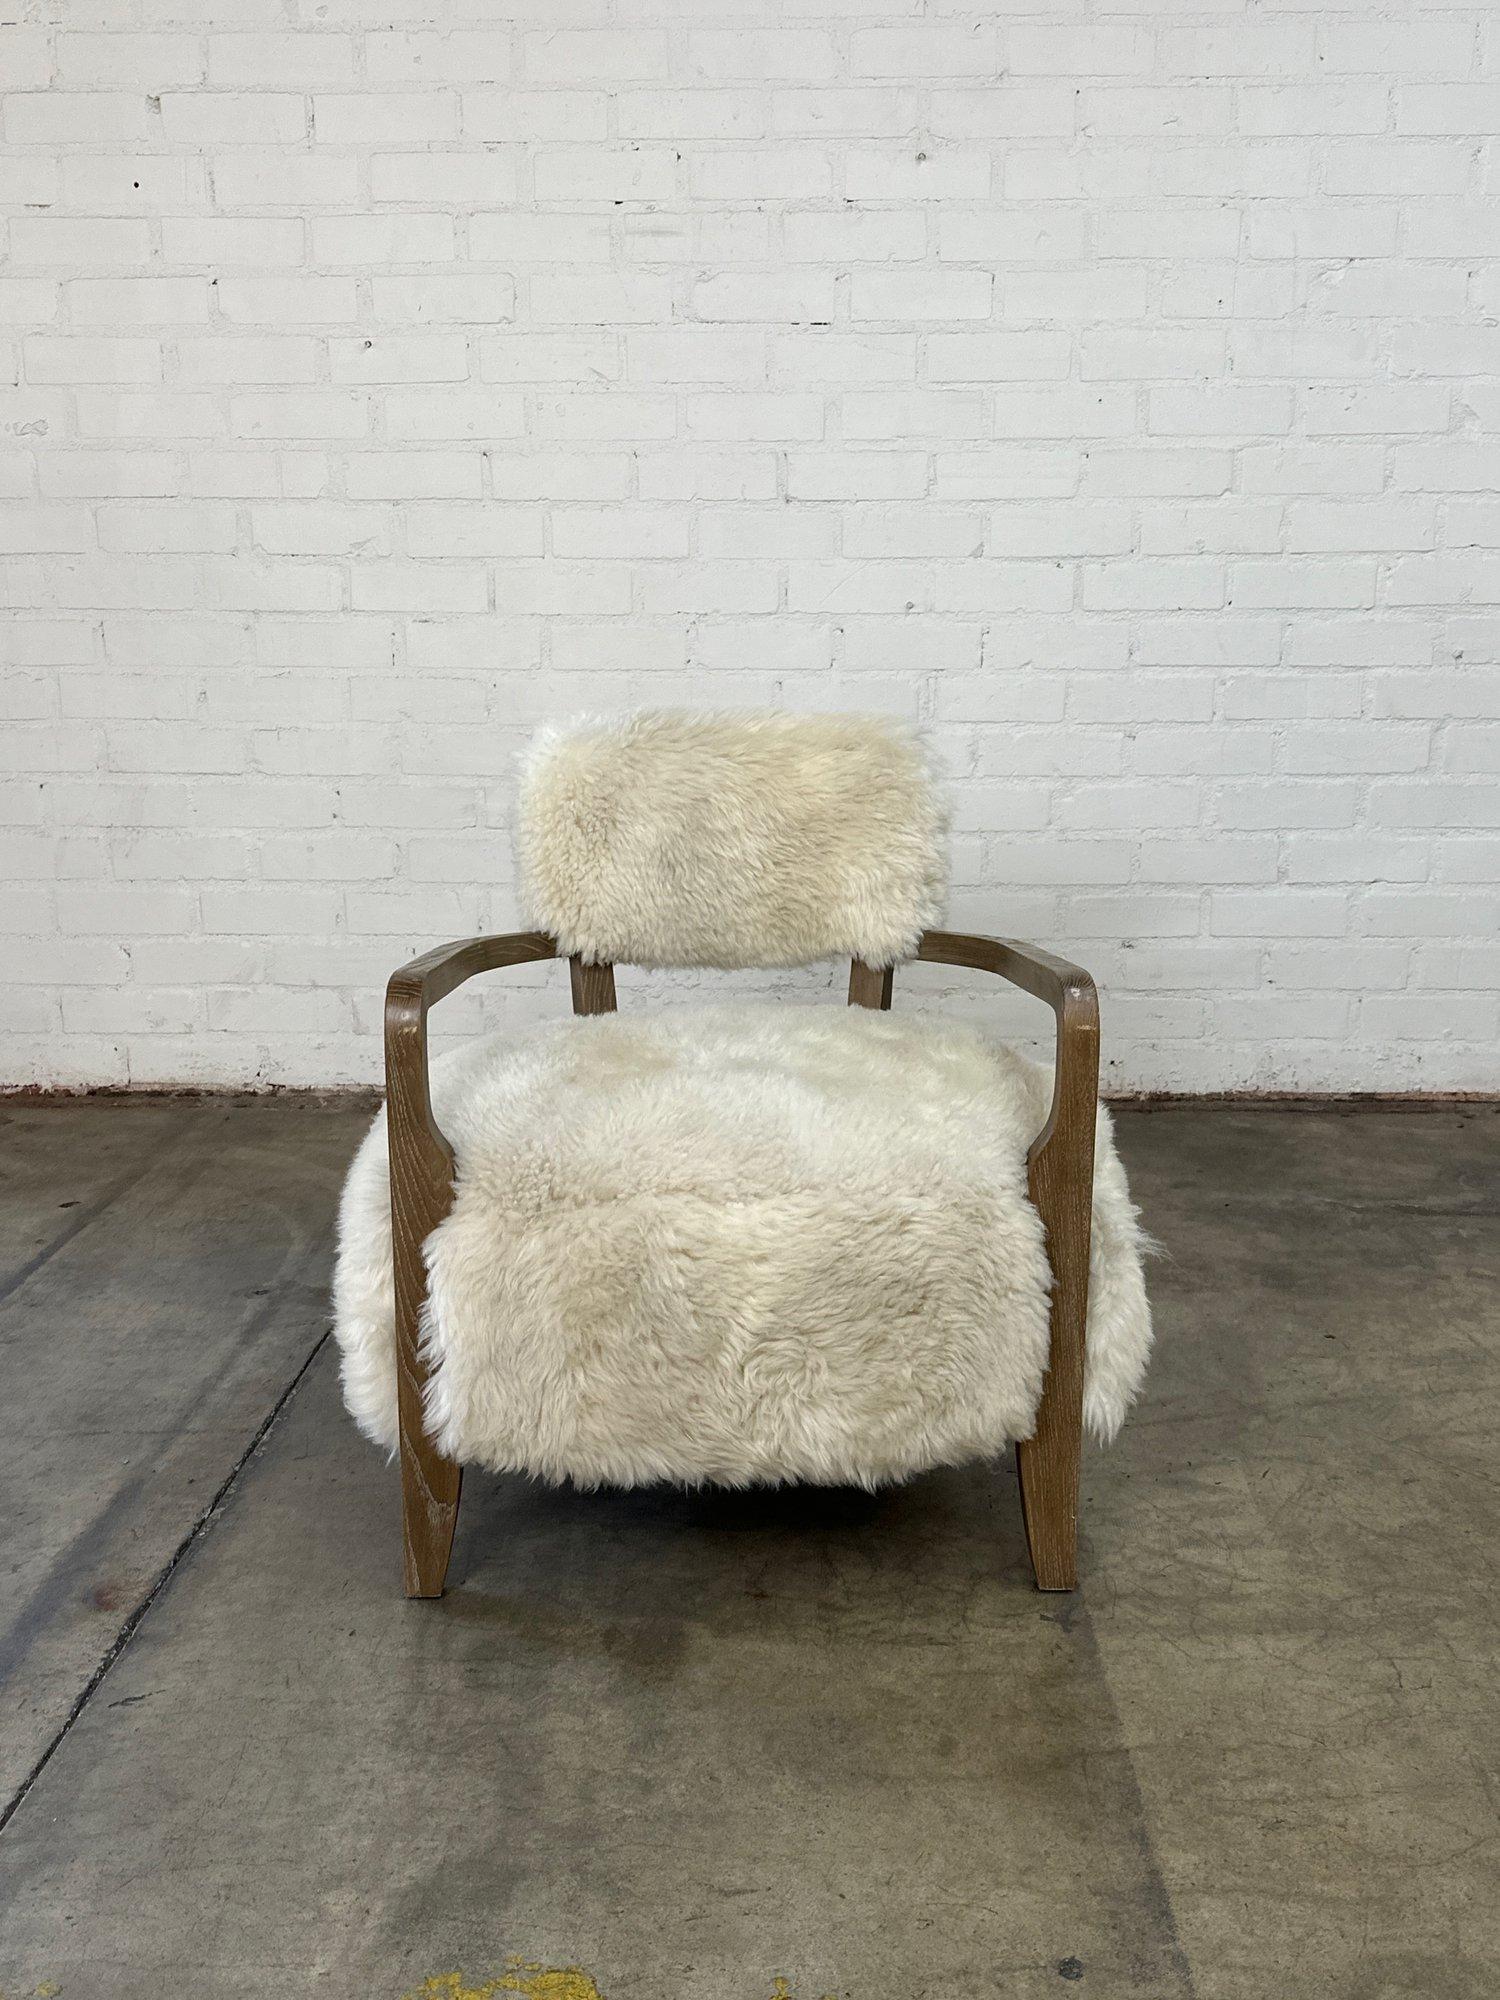 W30 D27 H31 SW24 SD21 SH17 AH24

Royce Lounge Chair by Interlude home in great gently used condition. Item shows well with no visible breaks or large damages to wooden frame. Sheepskin upholstery areas also are well preserved with no visible stains